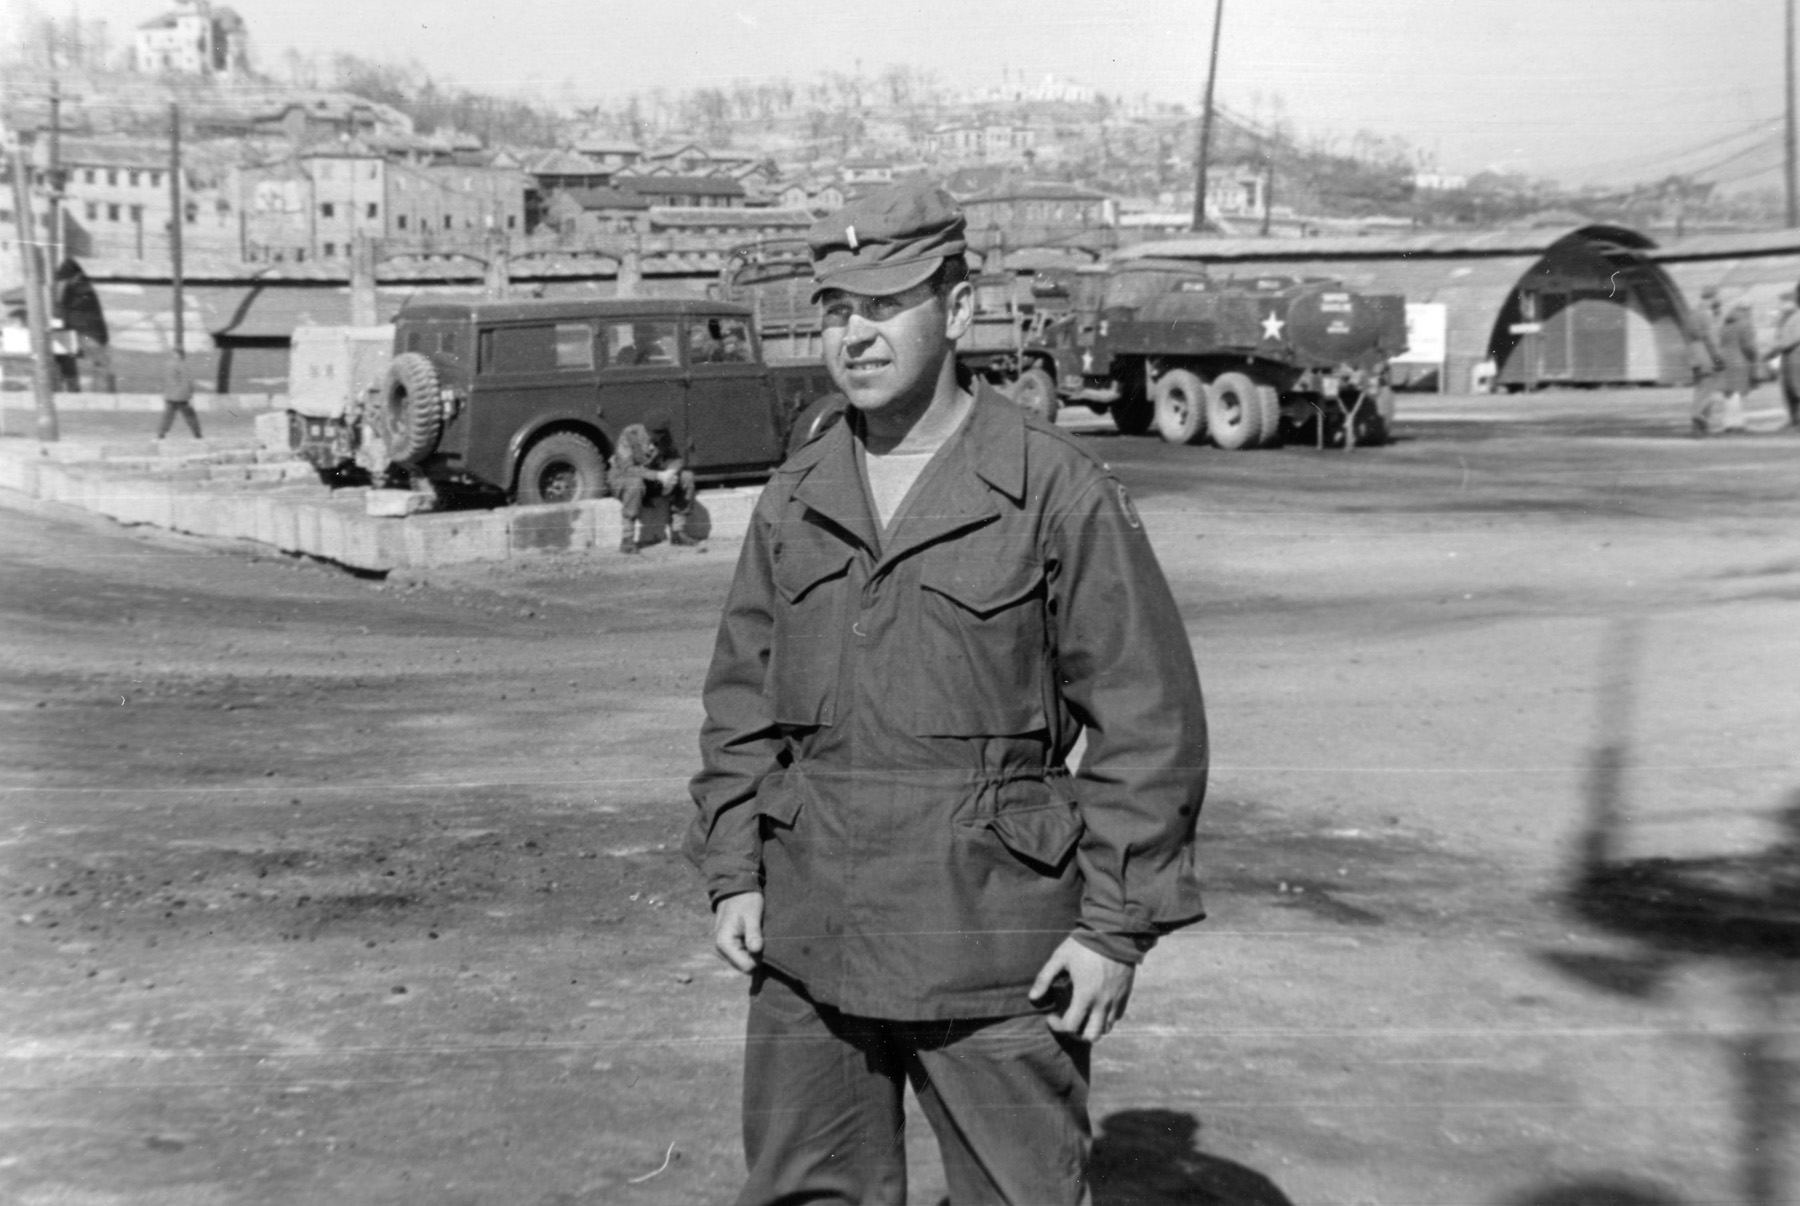 Lieutenant Sevel stands on Inchon beach where he commanded landing operations in September 1950. Sevel commanded a crash boat in the port city.